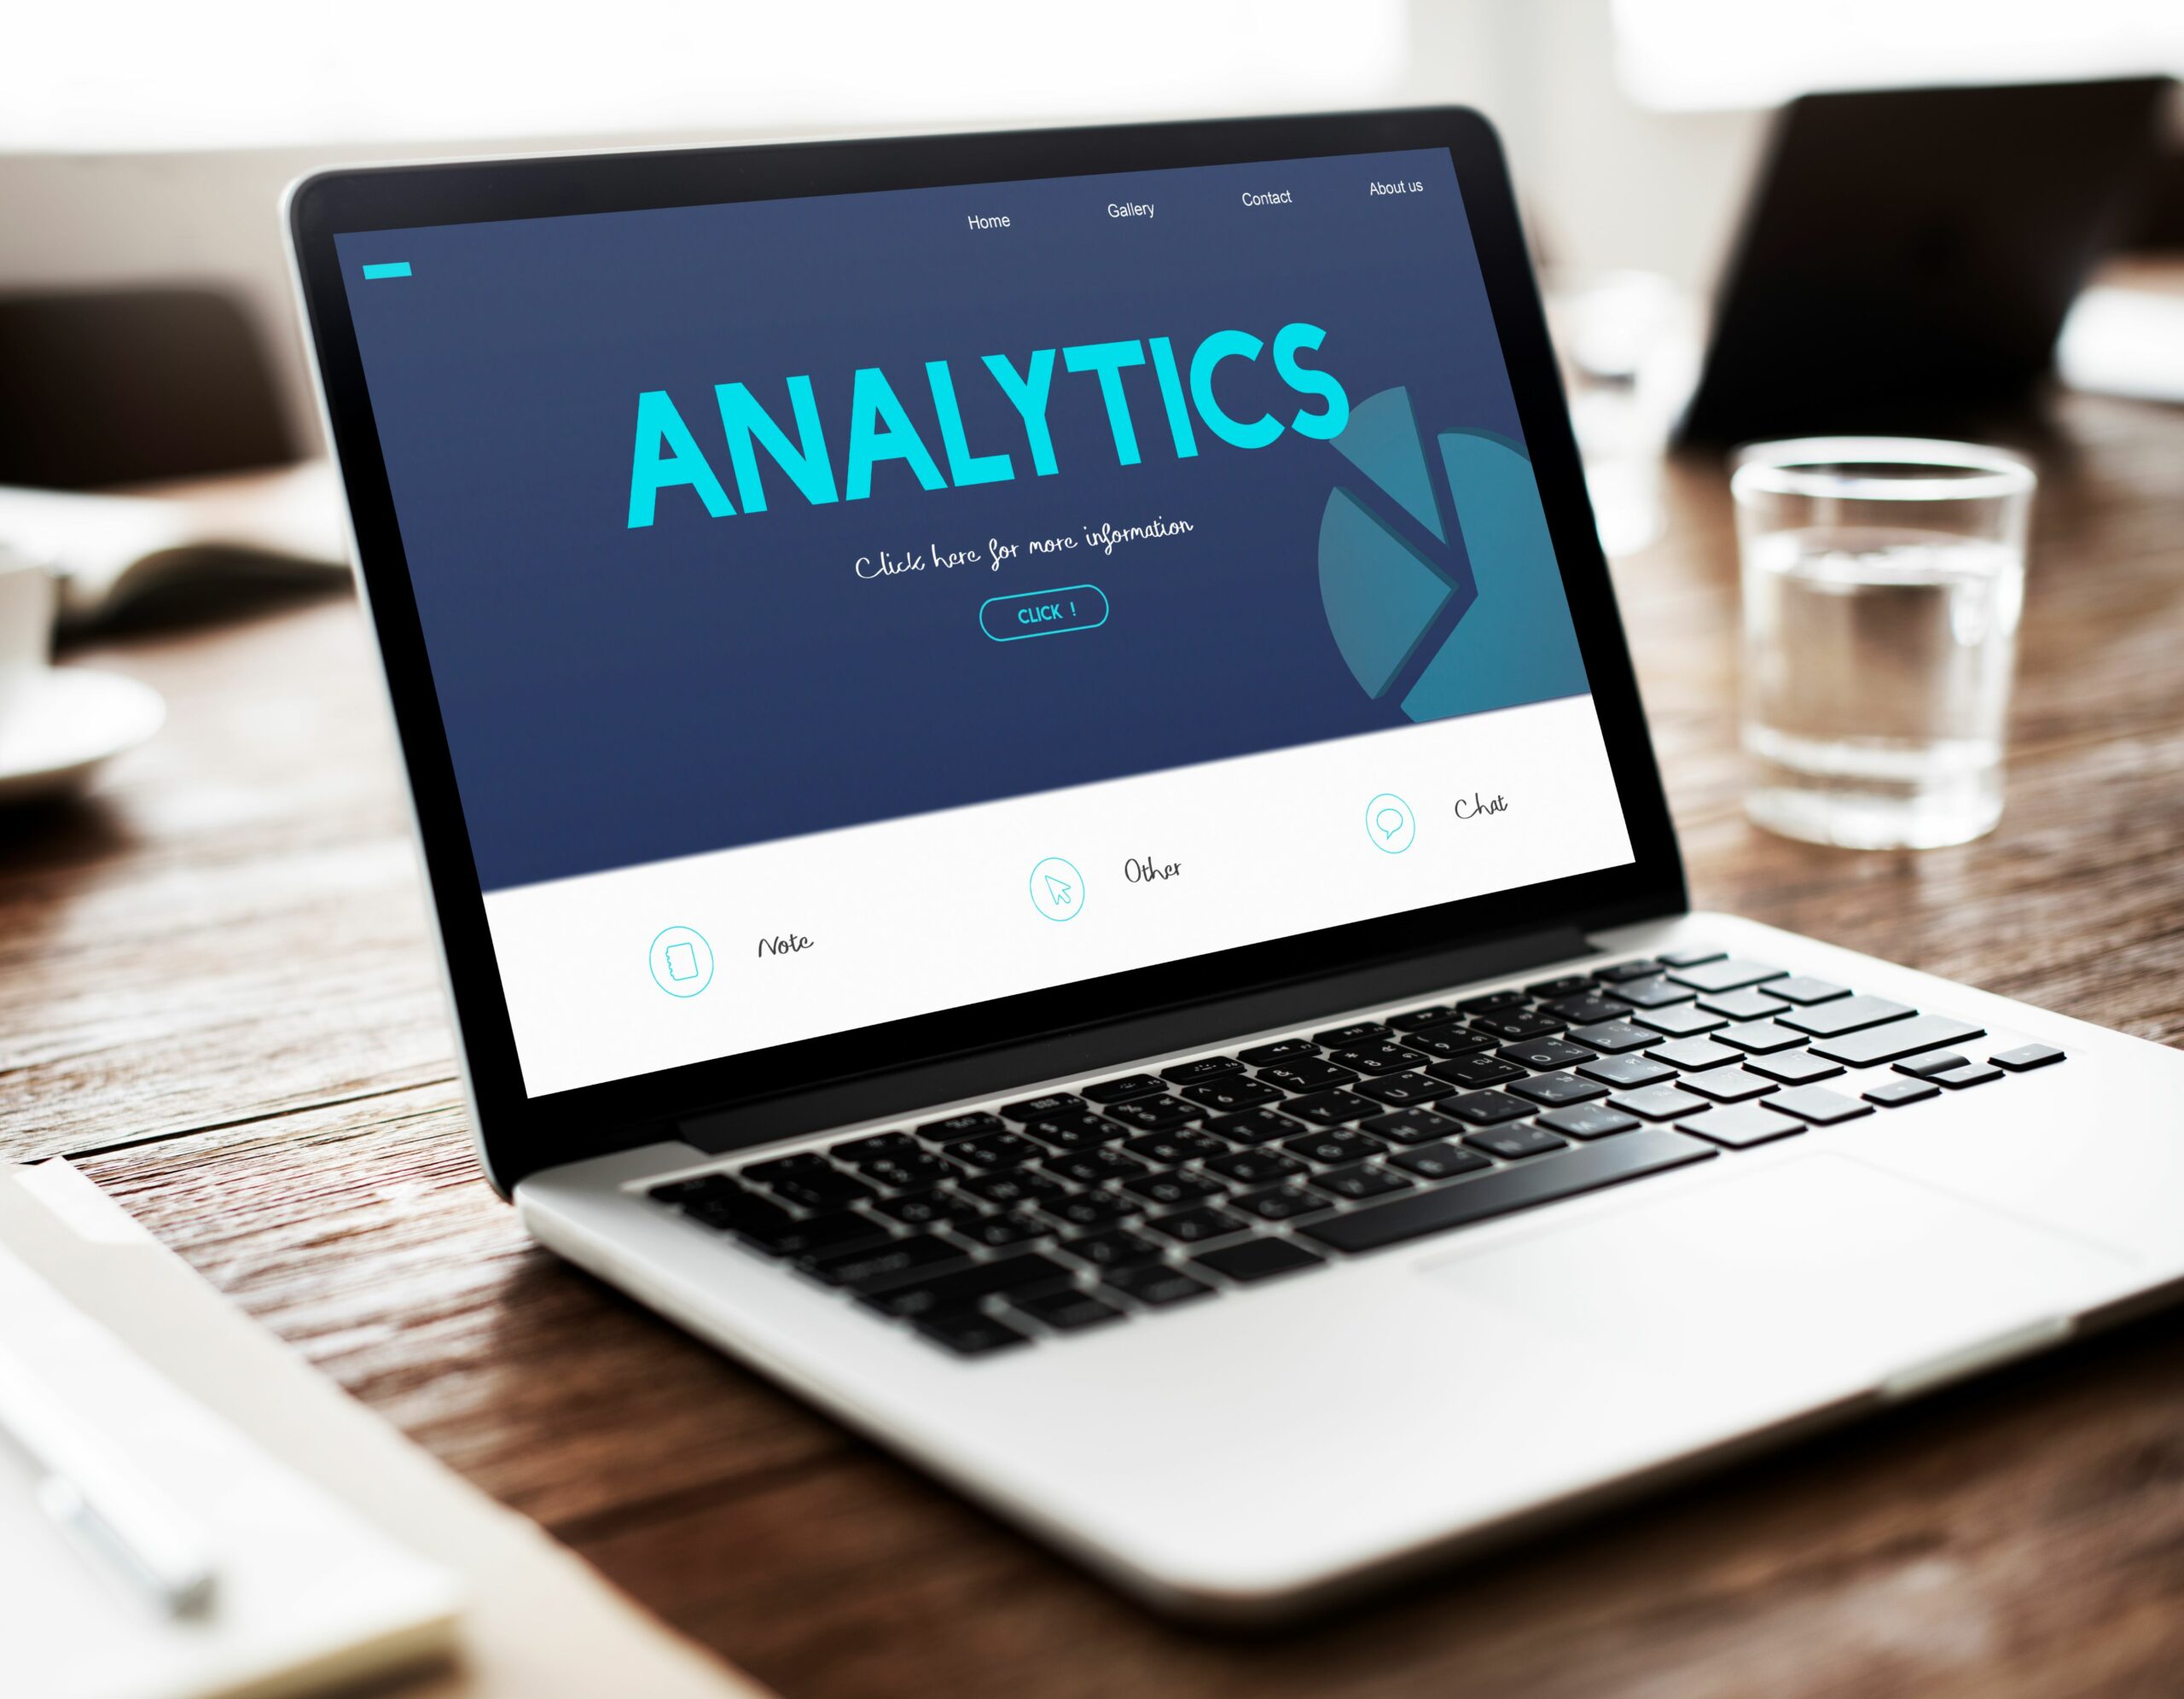 Getting analytics done right for your website can make or break your business